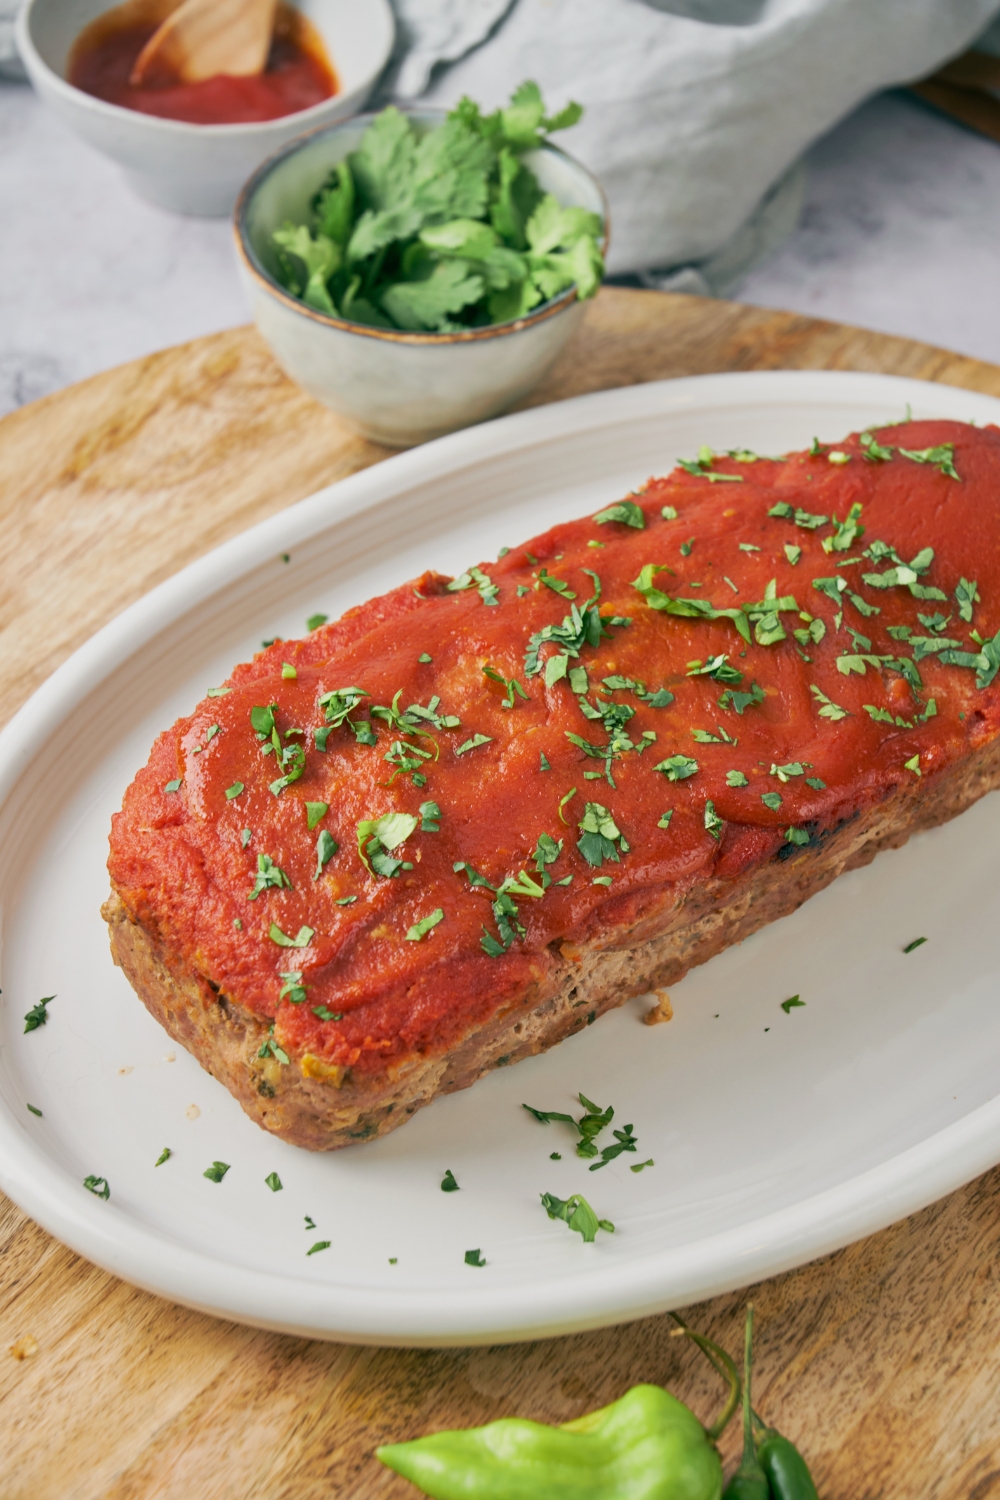 Meatloaf on a white plate covered in red sauce and garnished with fresh green herbs.